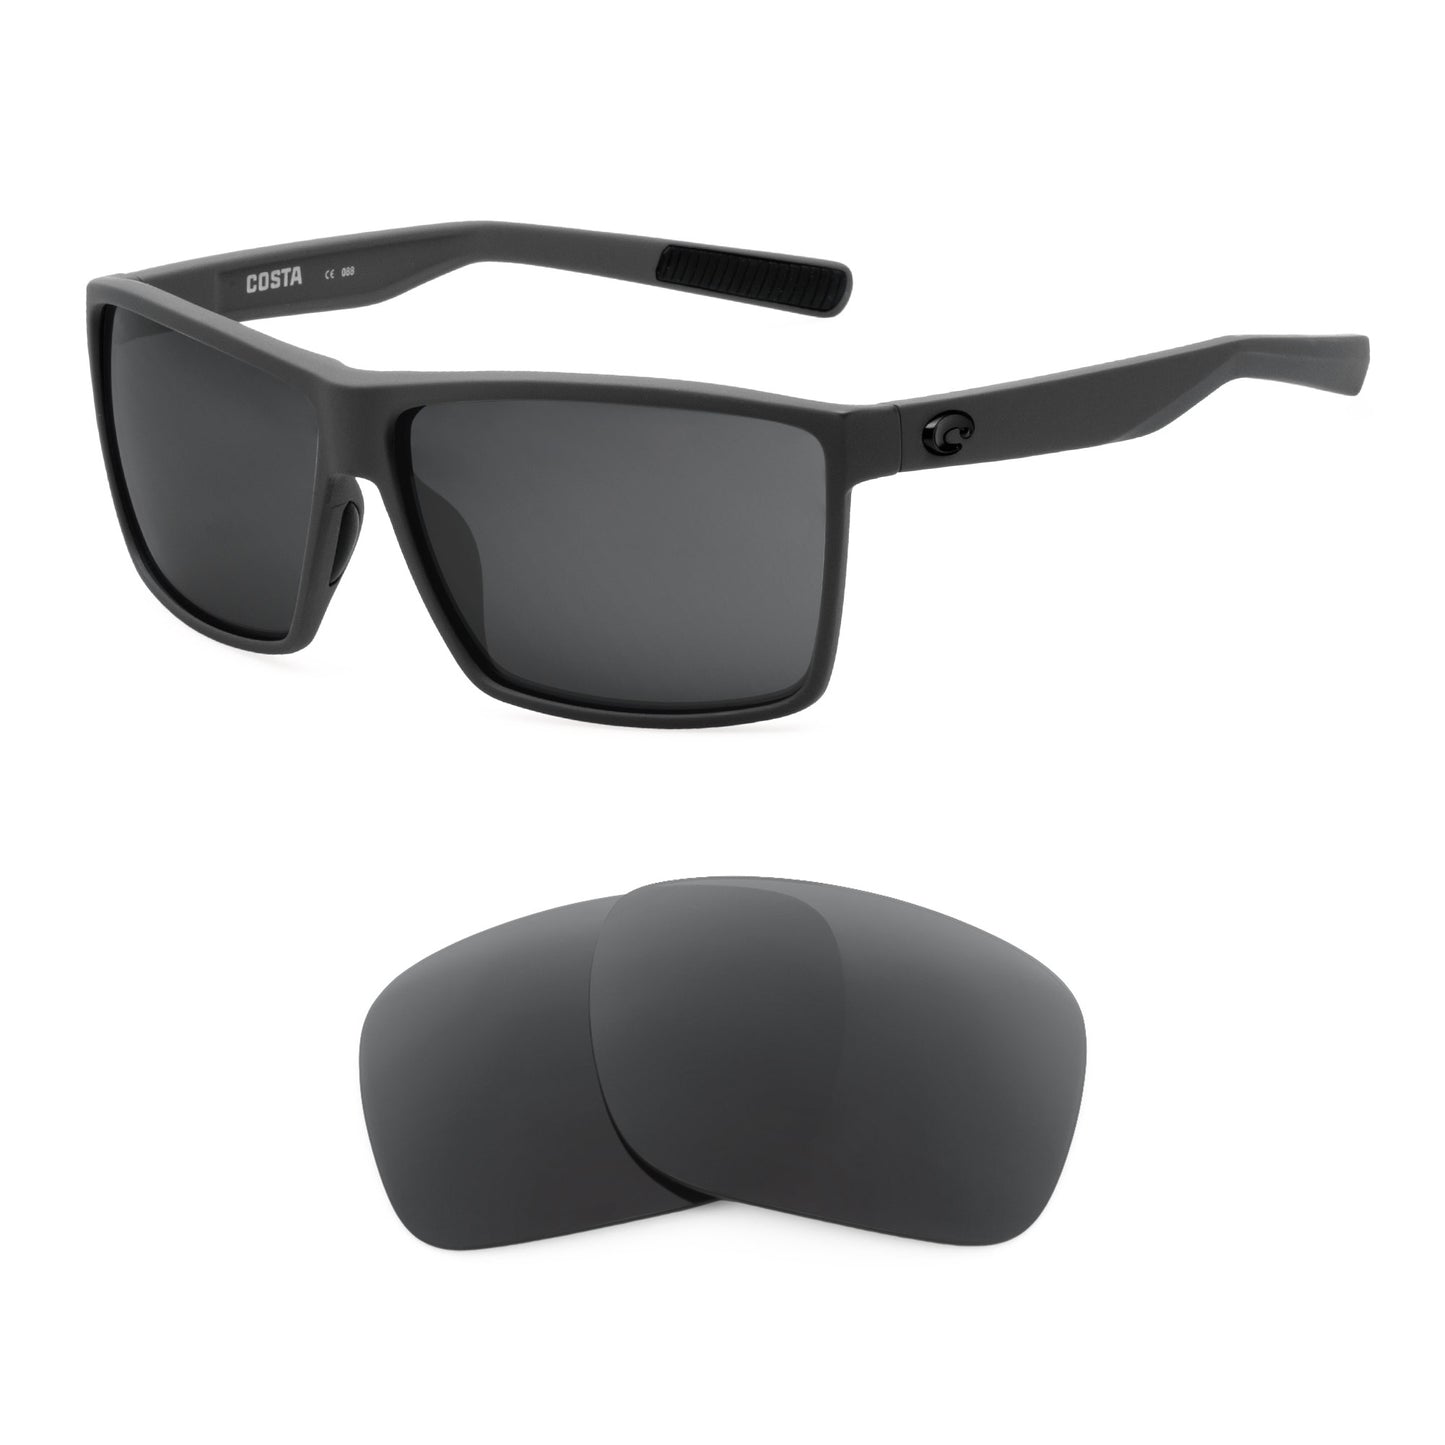 Costa Rincon sunglasses with replacement lenses